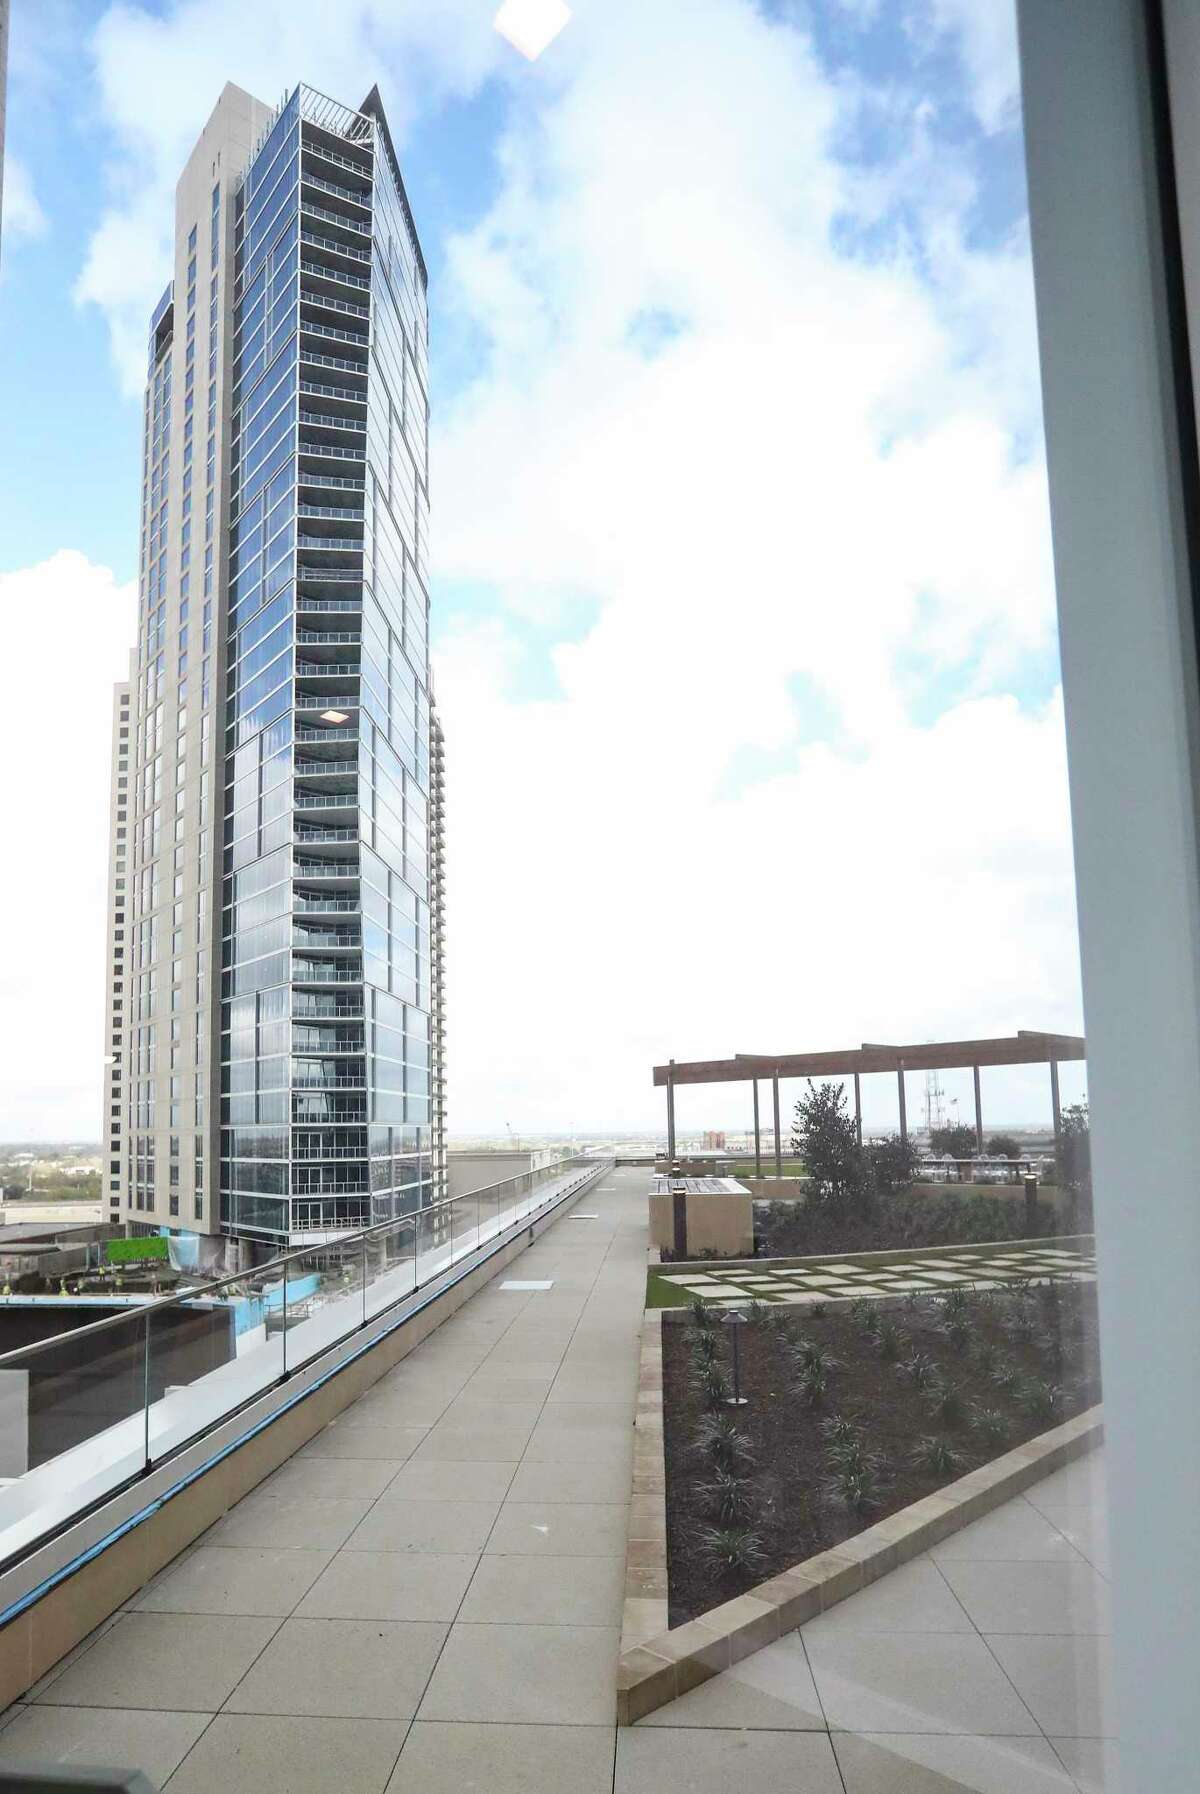 The 12th floor terrace of the downtown Texas Tower has a view of Brava, a new 46-story apartment on the site of the former Houston Chronicle garage. This very modern building is nearing completion, expected to open to the public in early March.